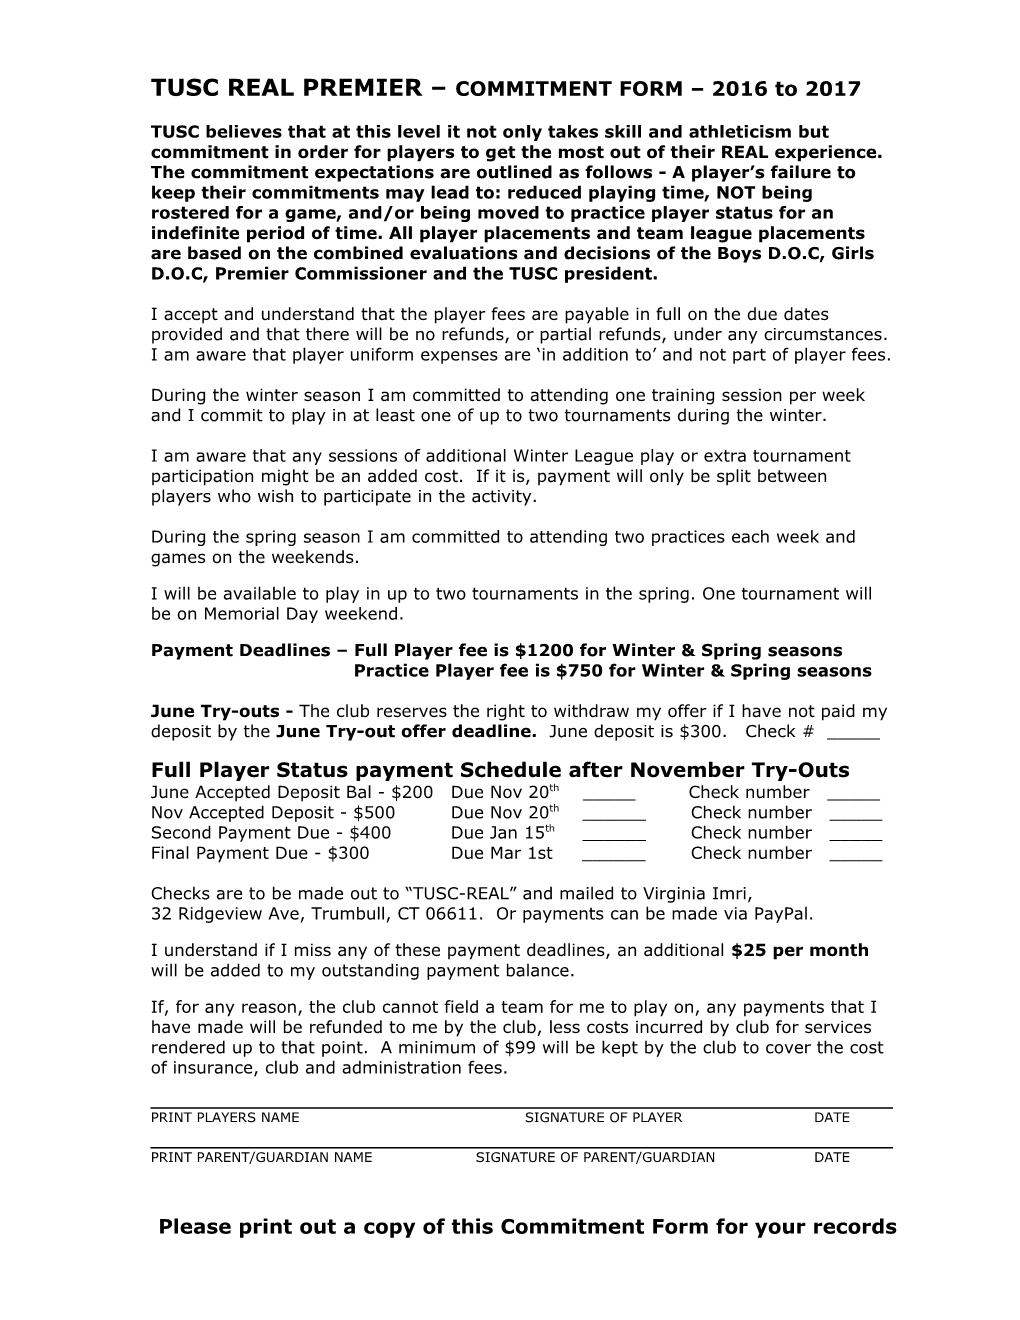 TUSC REAL PREMIER COMMITMENT FORM 2016 to 2017